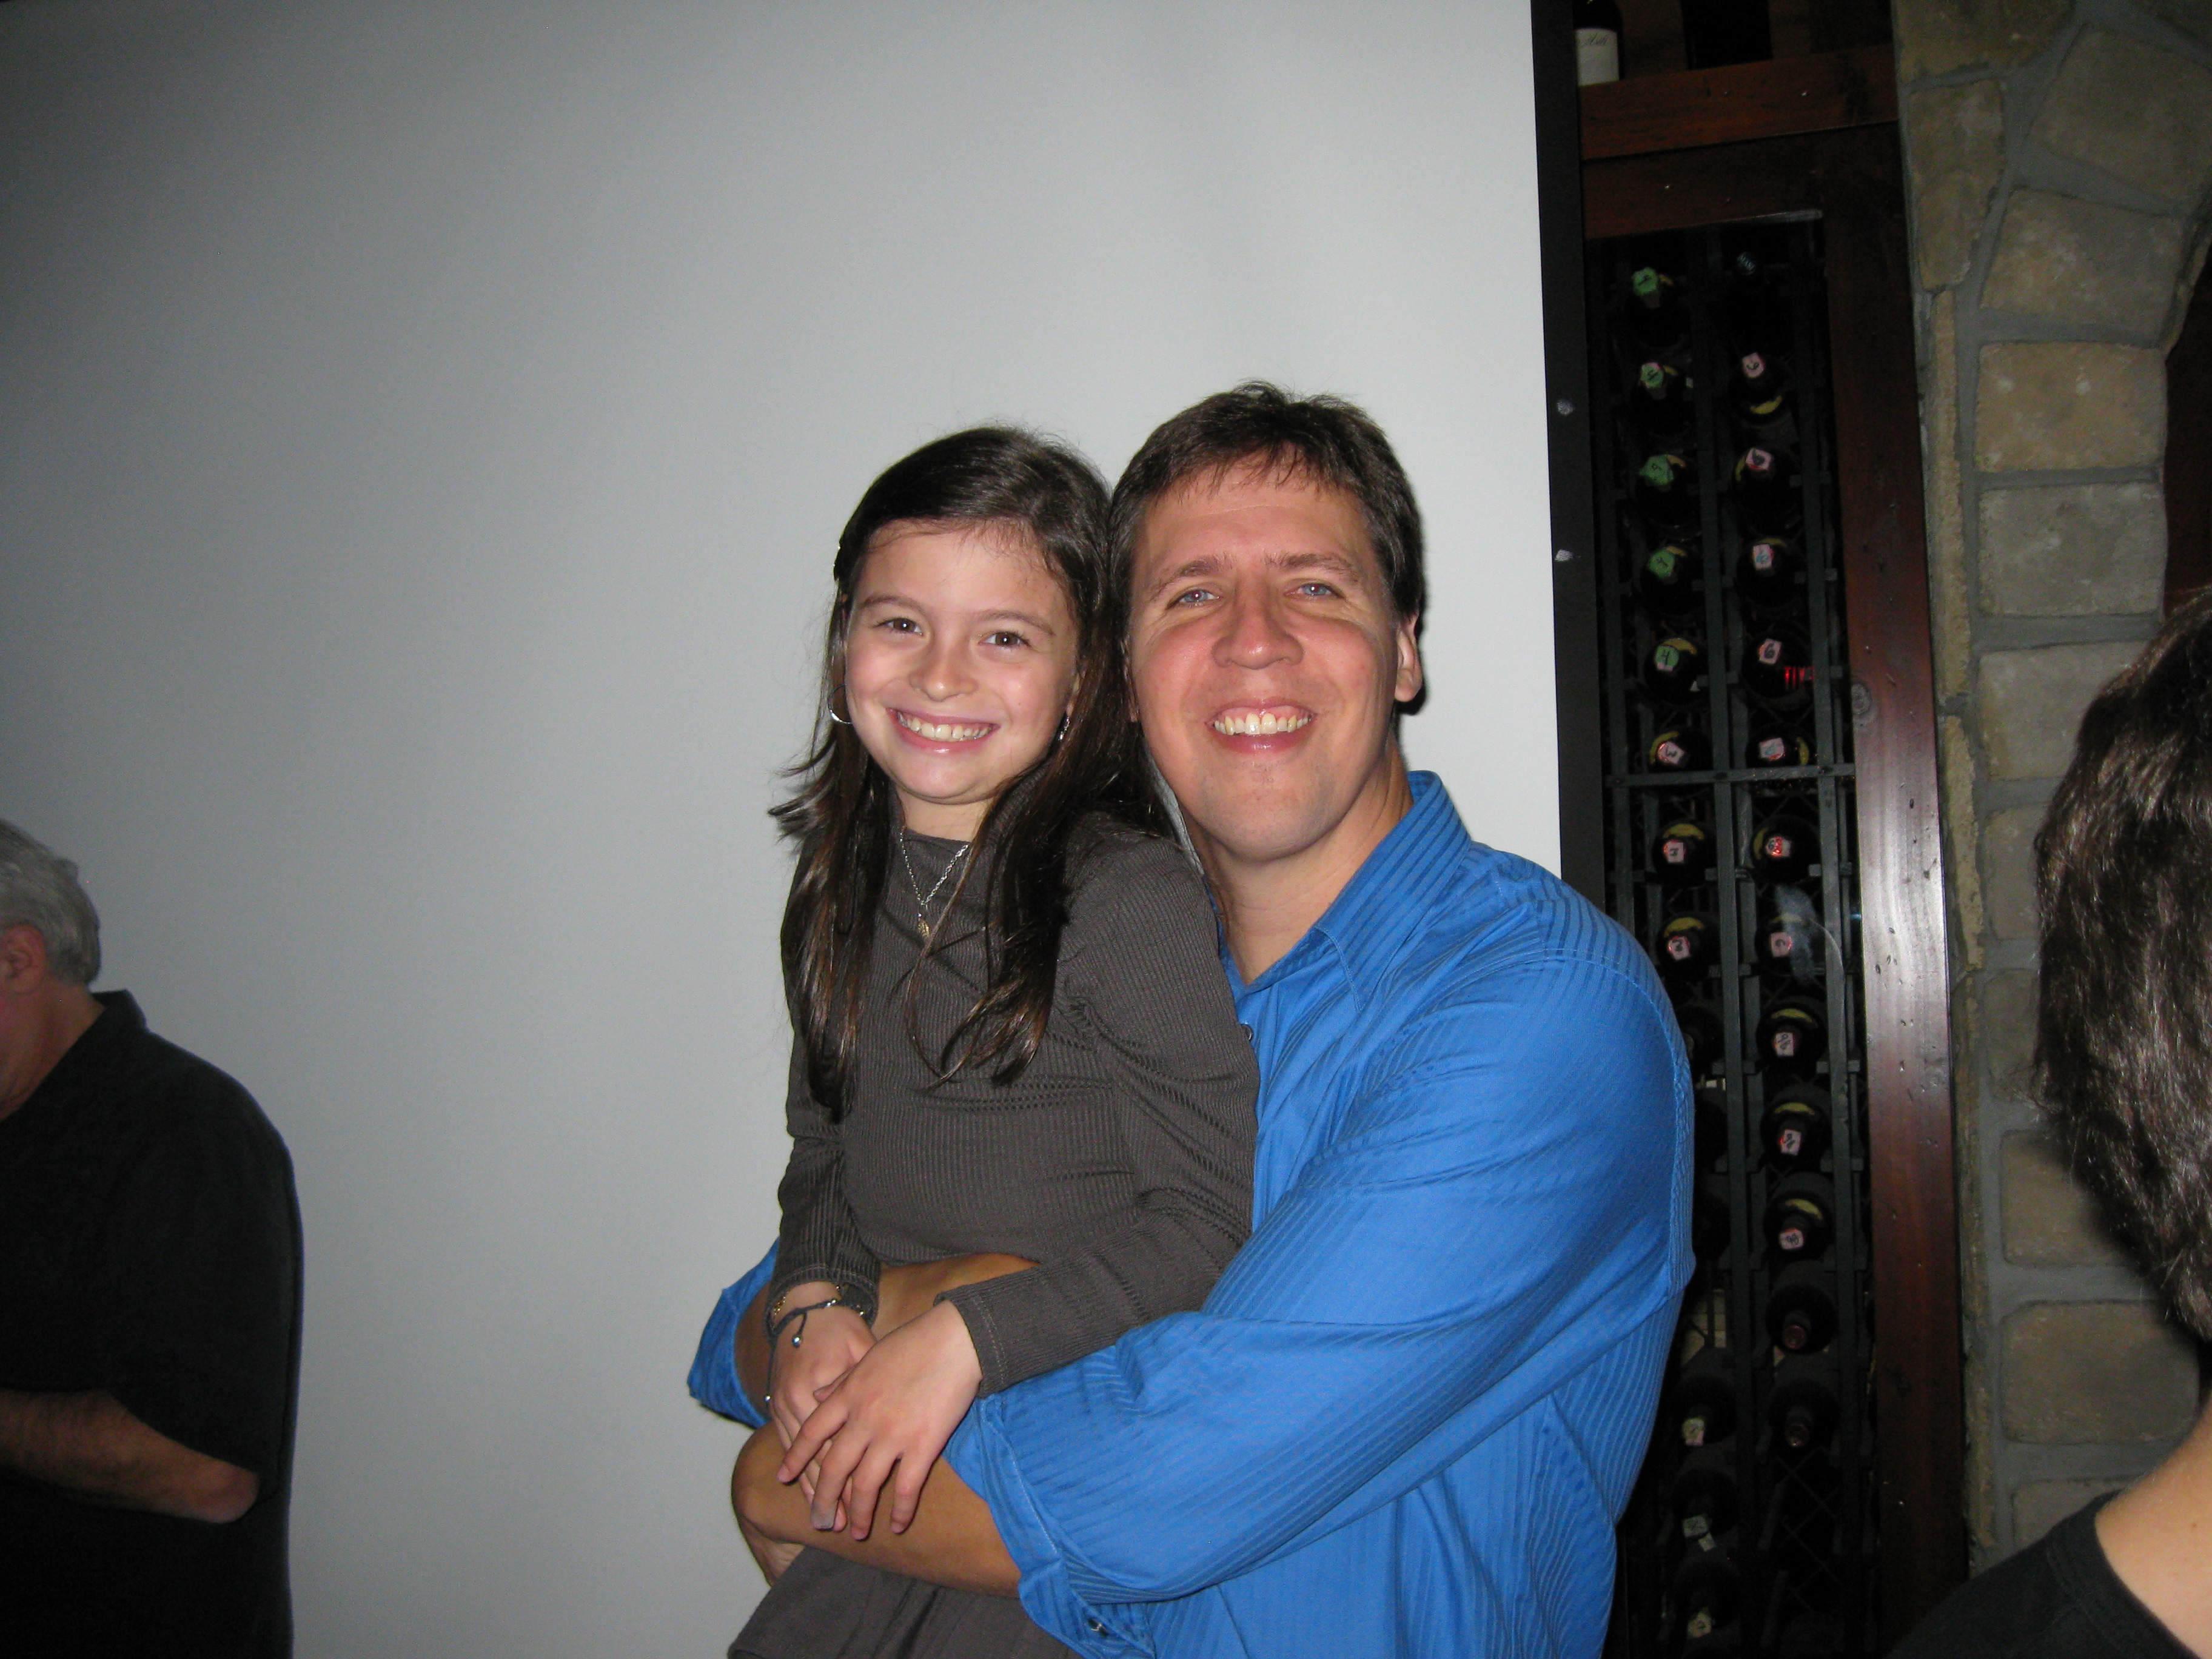 Dalila Bela & Jeff Kinney at the wrap party of 